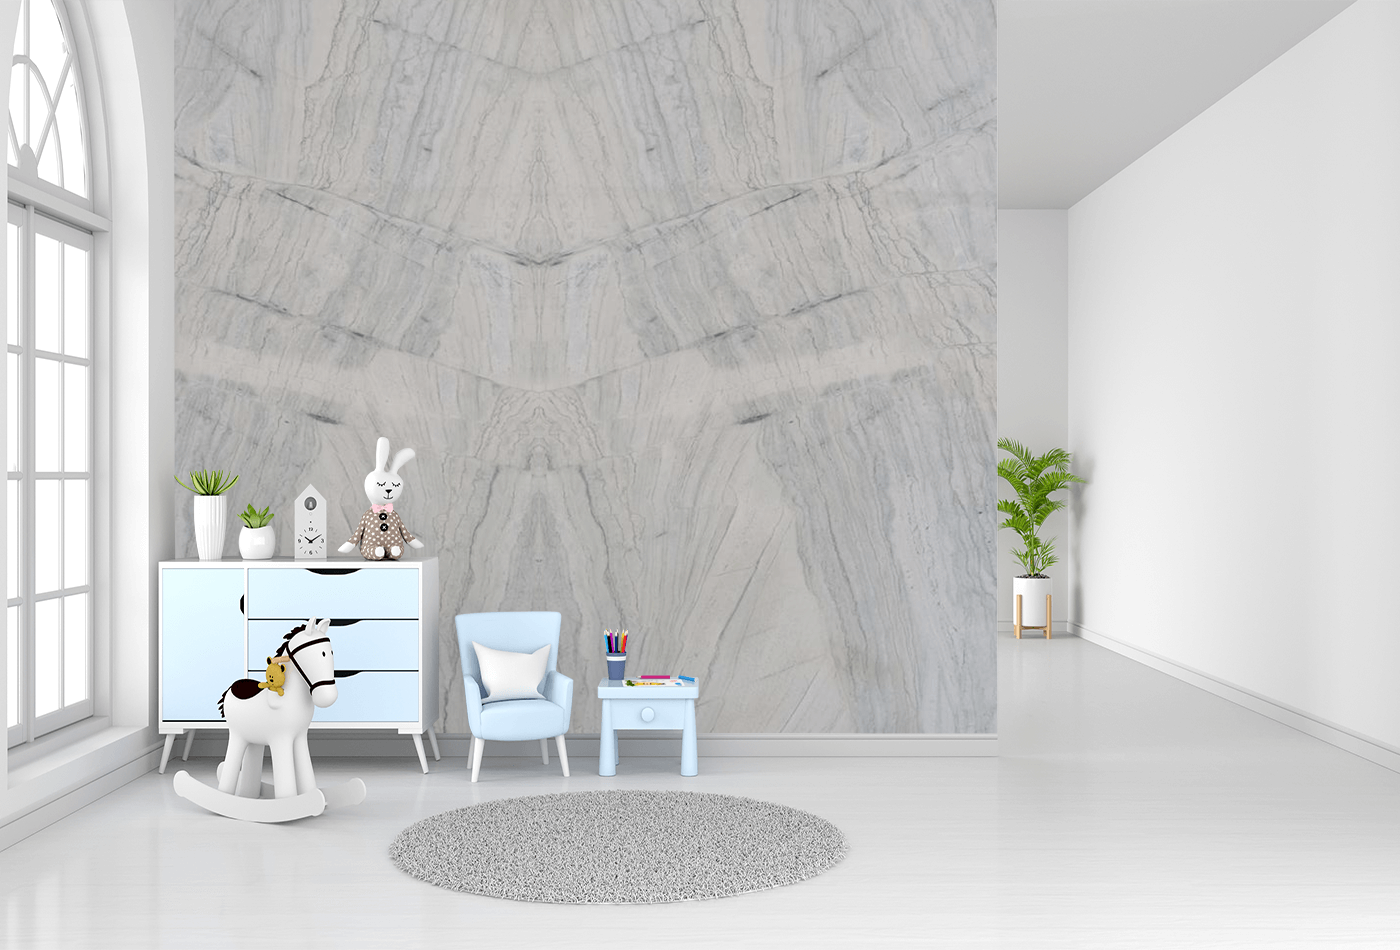 Quartzite In Kid's Playing Room, Pack Up Their Souls With Joy